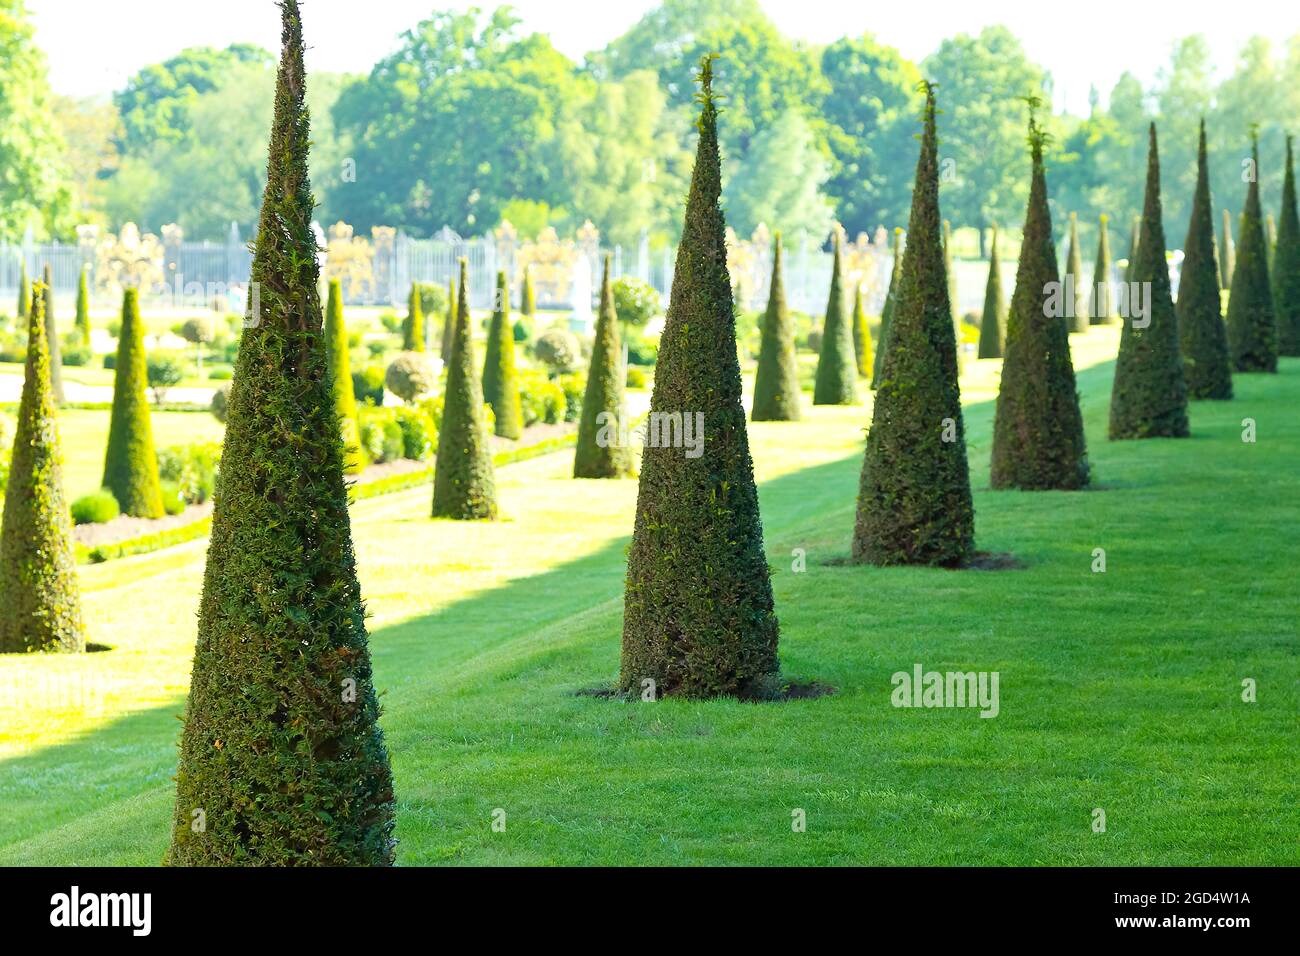 Richmond upon Thames, London, UK - May 25, 2012: rows of cone shaped yew trees in summer sun, detail of the Privy Garden at Hampton Court Palace. Stock Photo